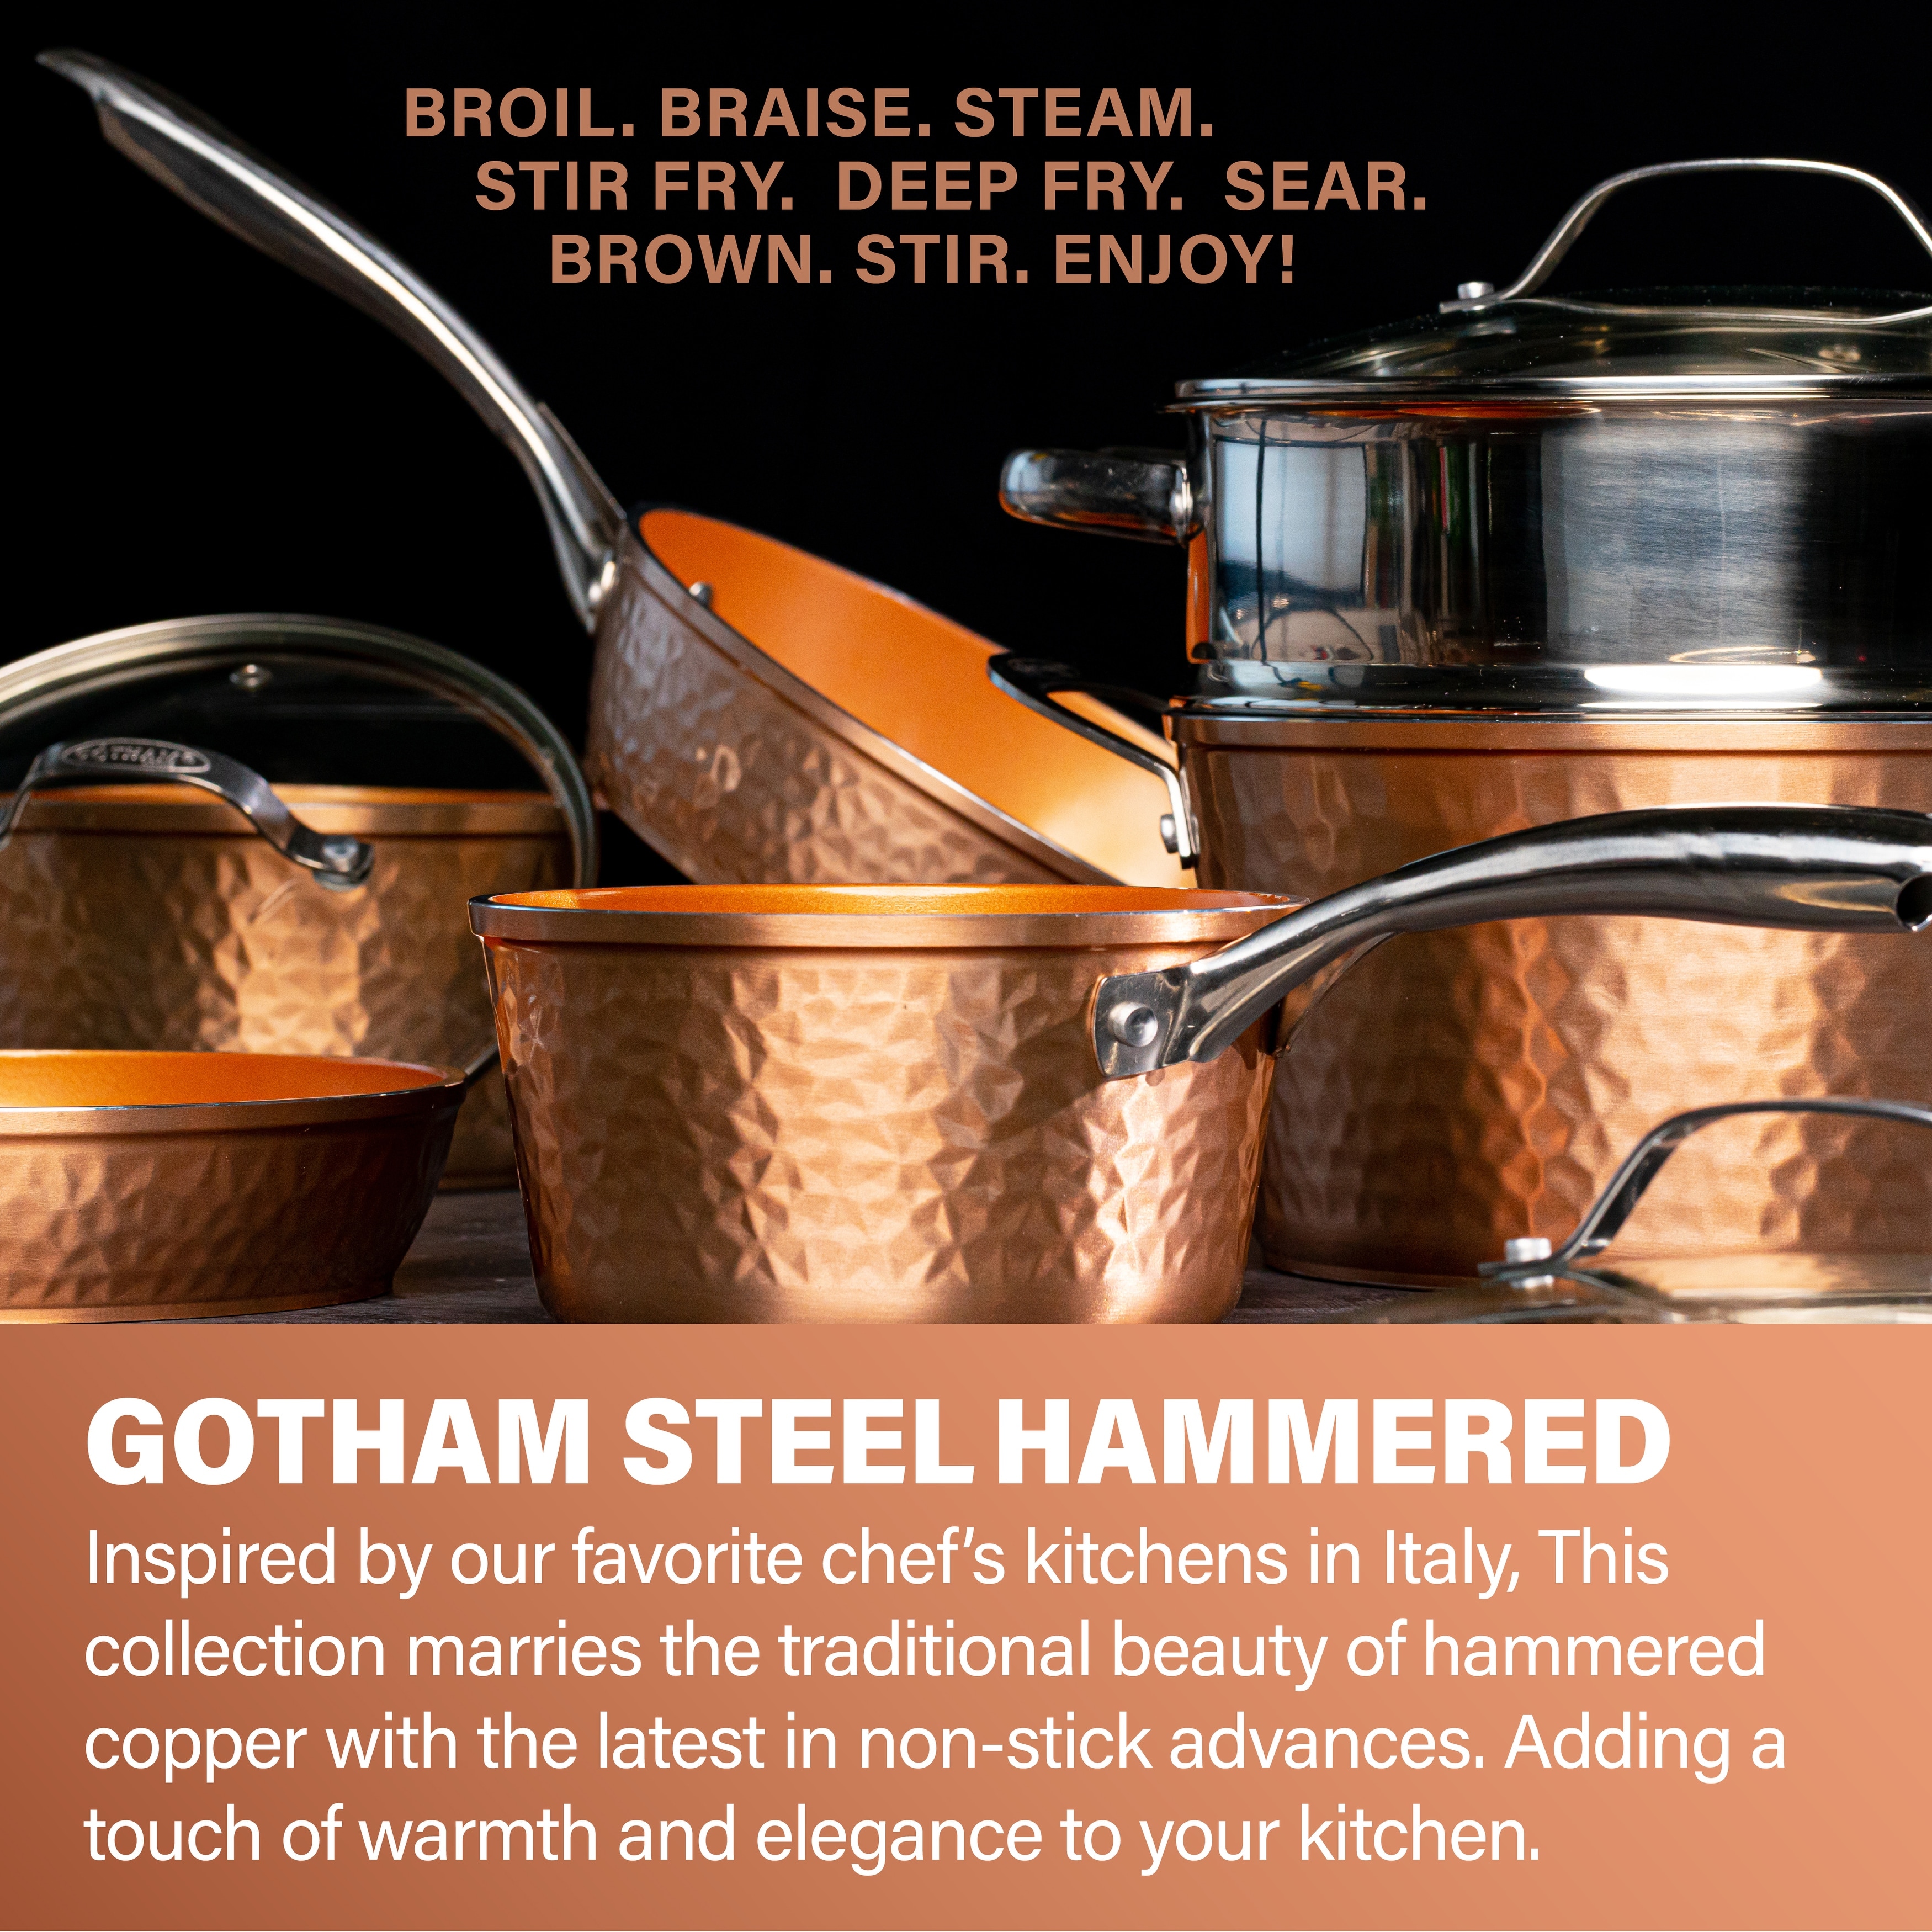 https://ak1.ostkcdn.com/images/products/is/images/direct/2bbd3208aa5adde9055b9b740bb438d7d86ad347/Gotham-Steel-Hammered-12%27%27-Nonstick-Frying-Pan-Skillet-with-Lid.jpg